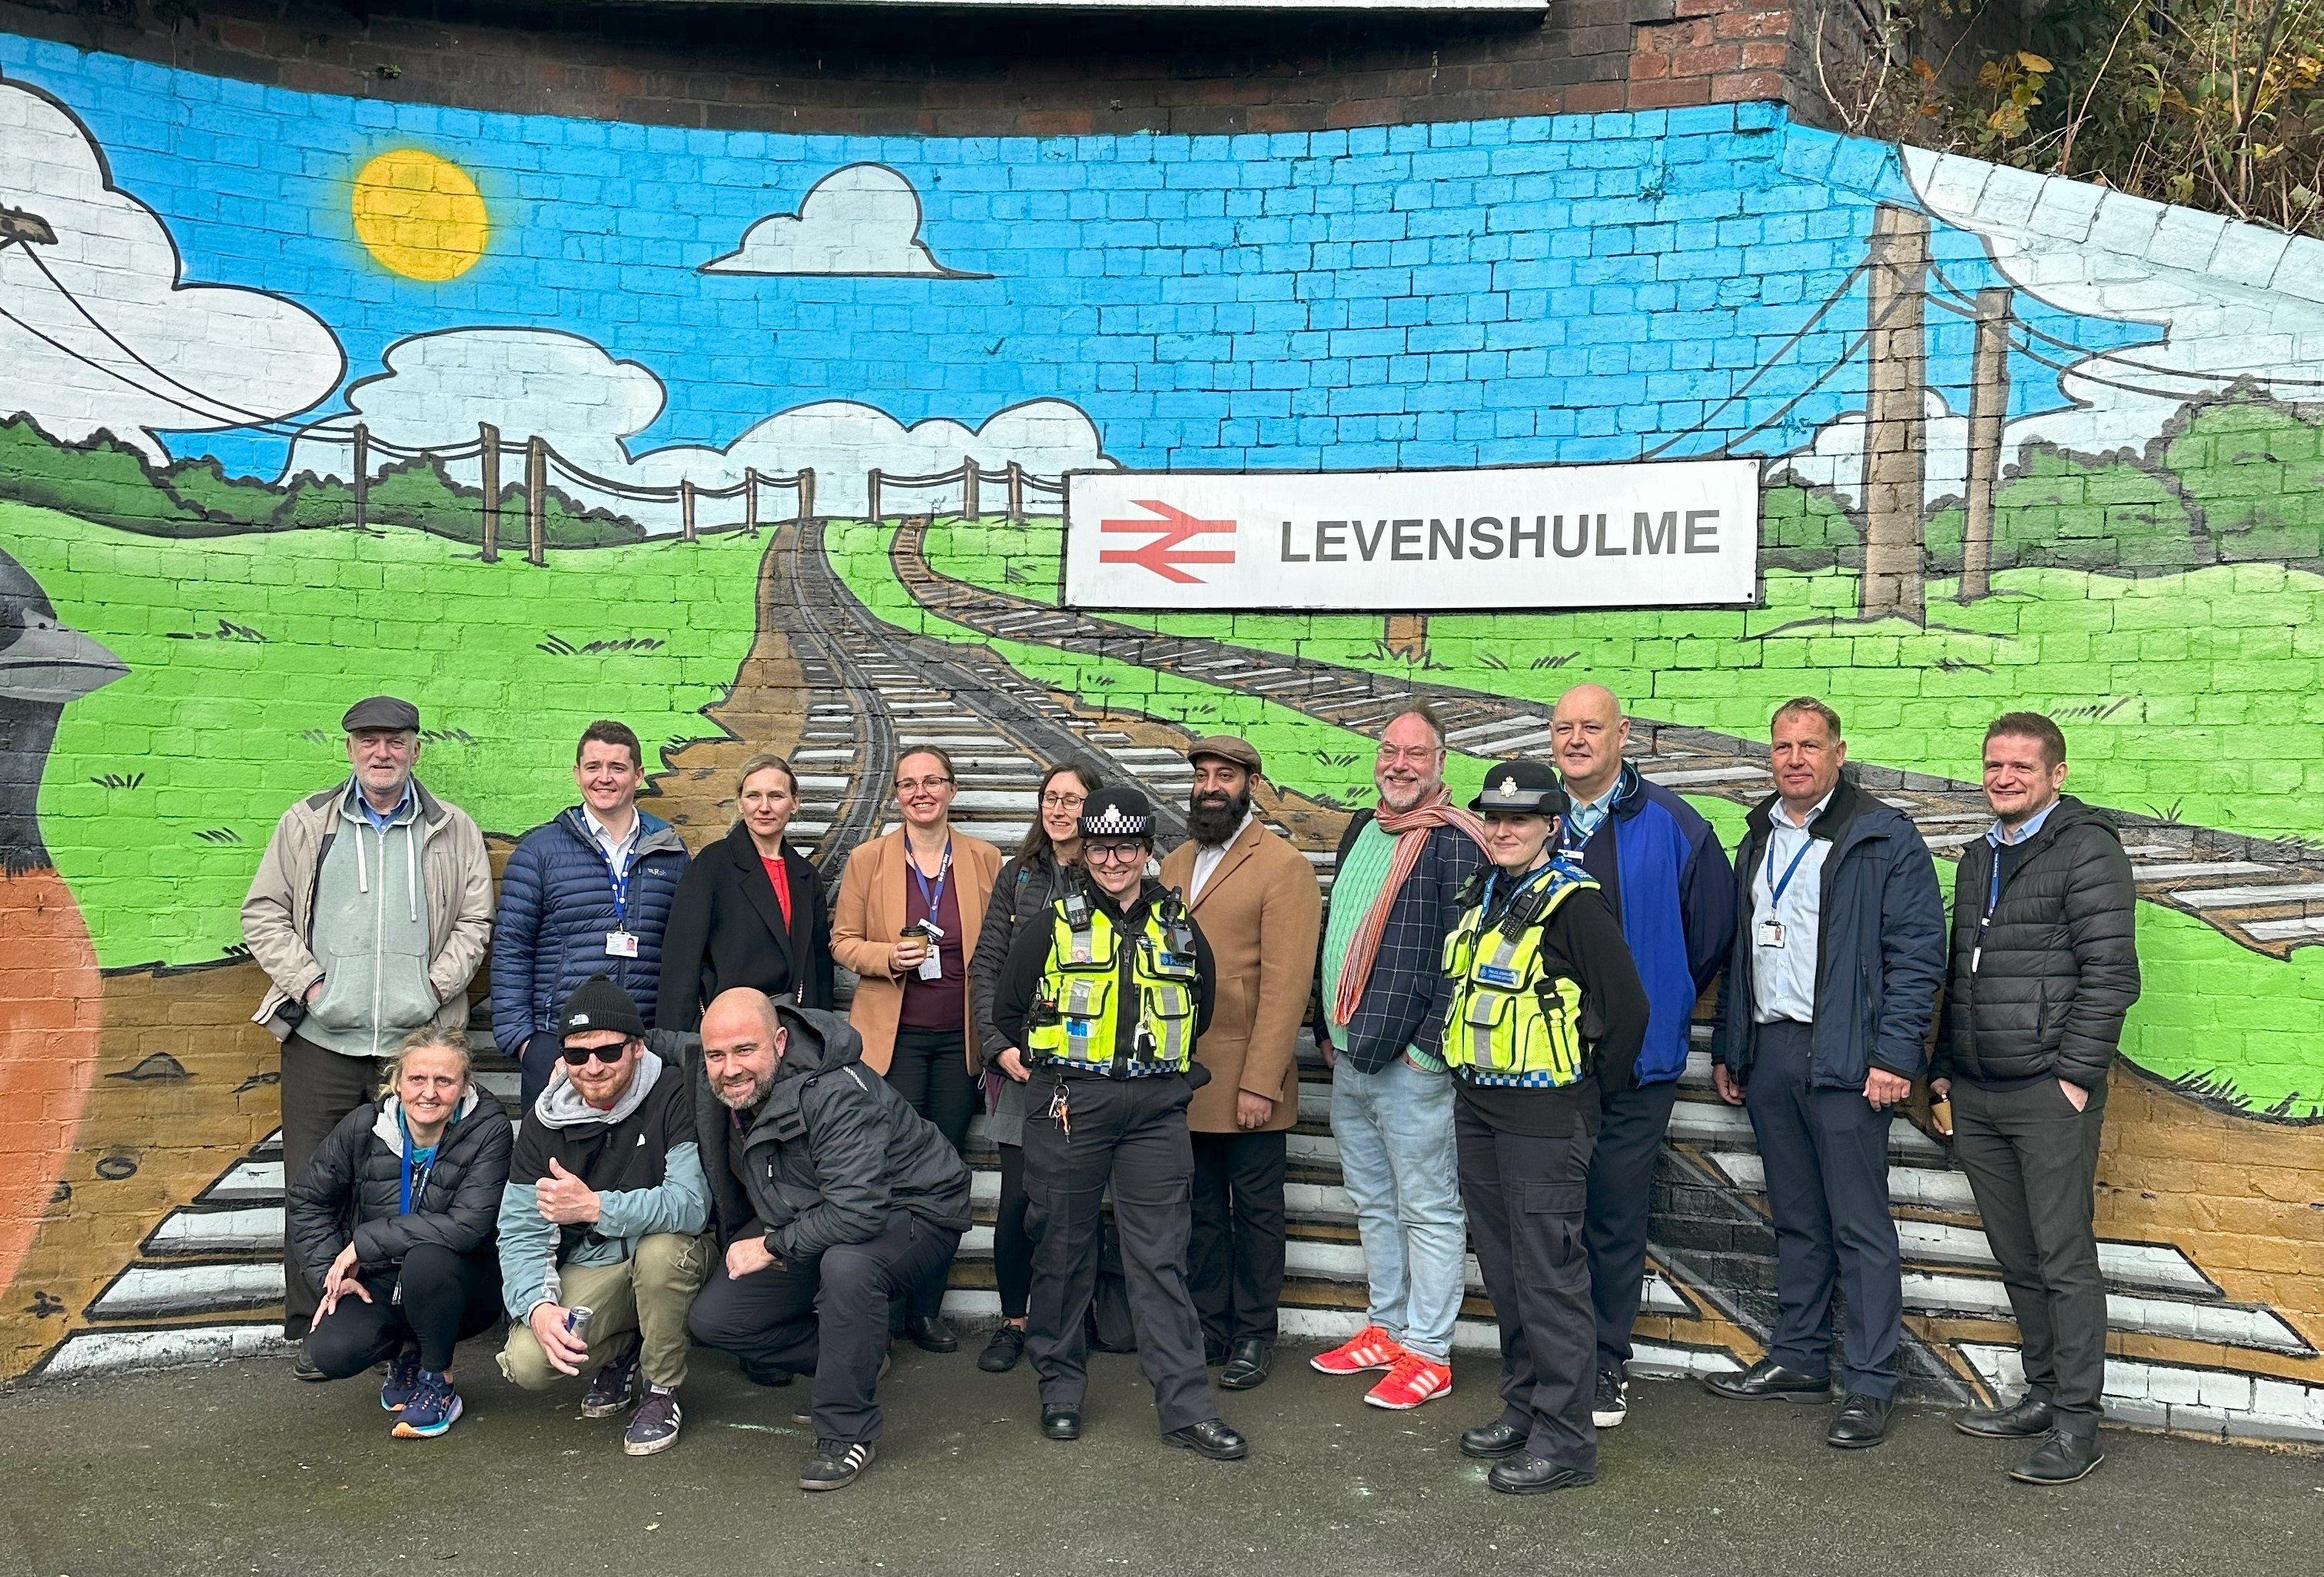 this-image-shows-the-celebration-of-the-new-mural-at-levenshulme